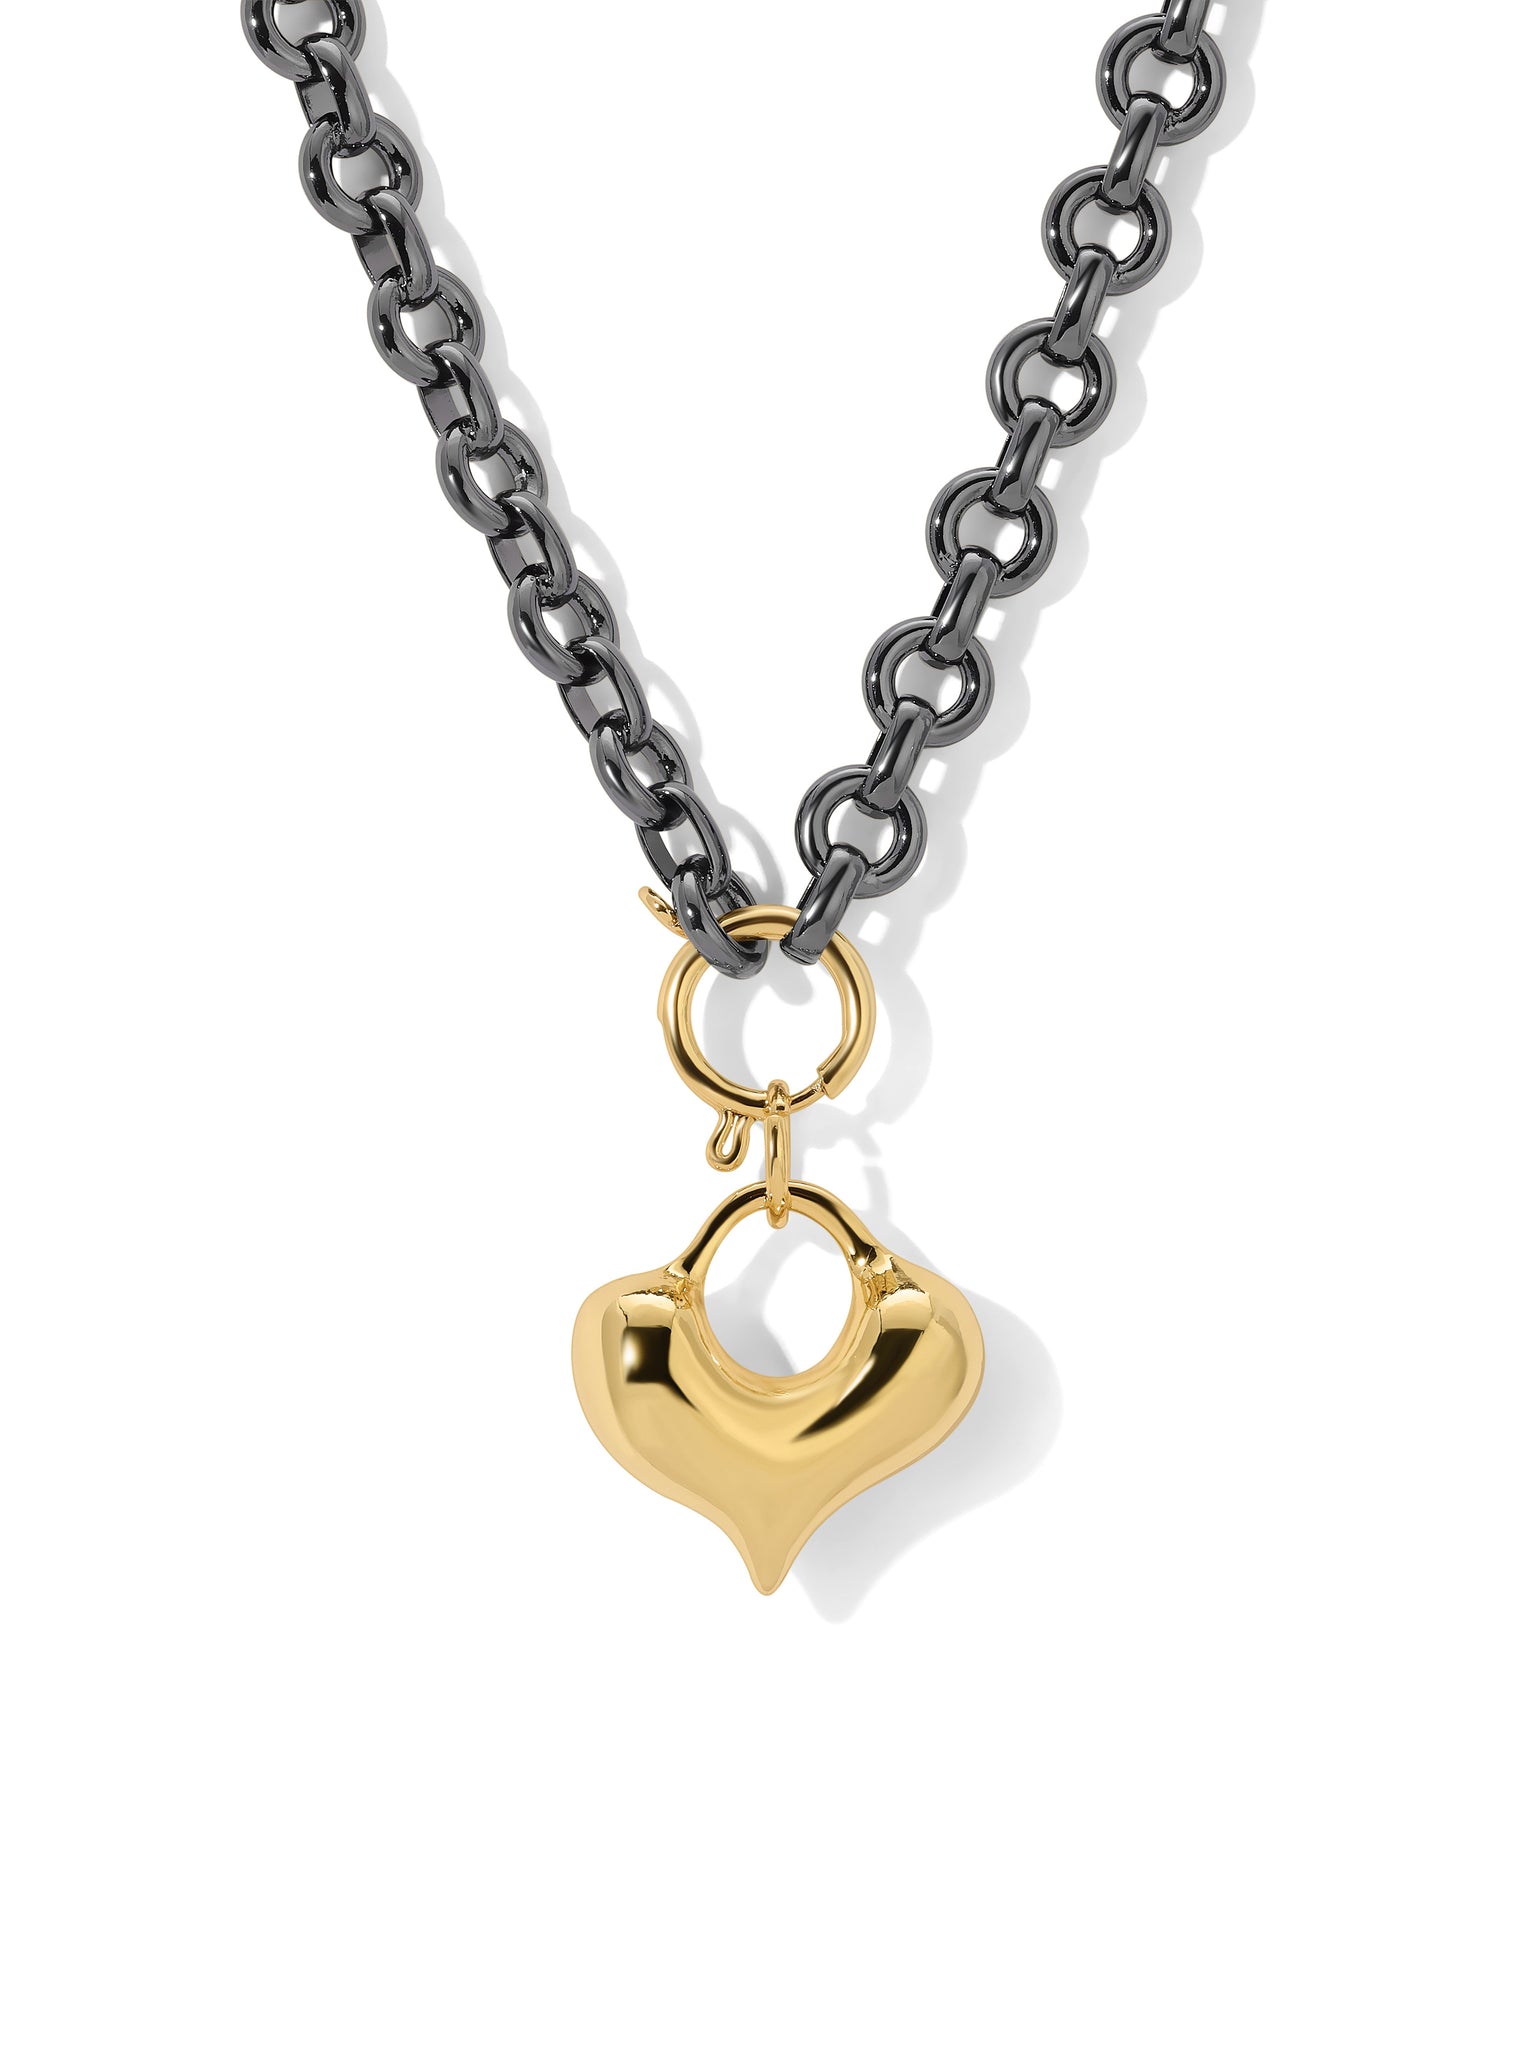 The Gemma Heart Necklace